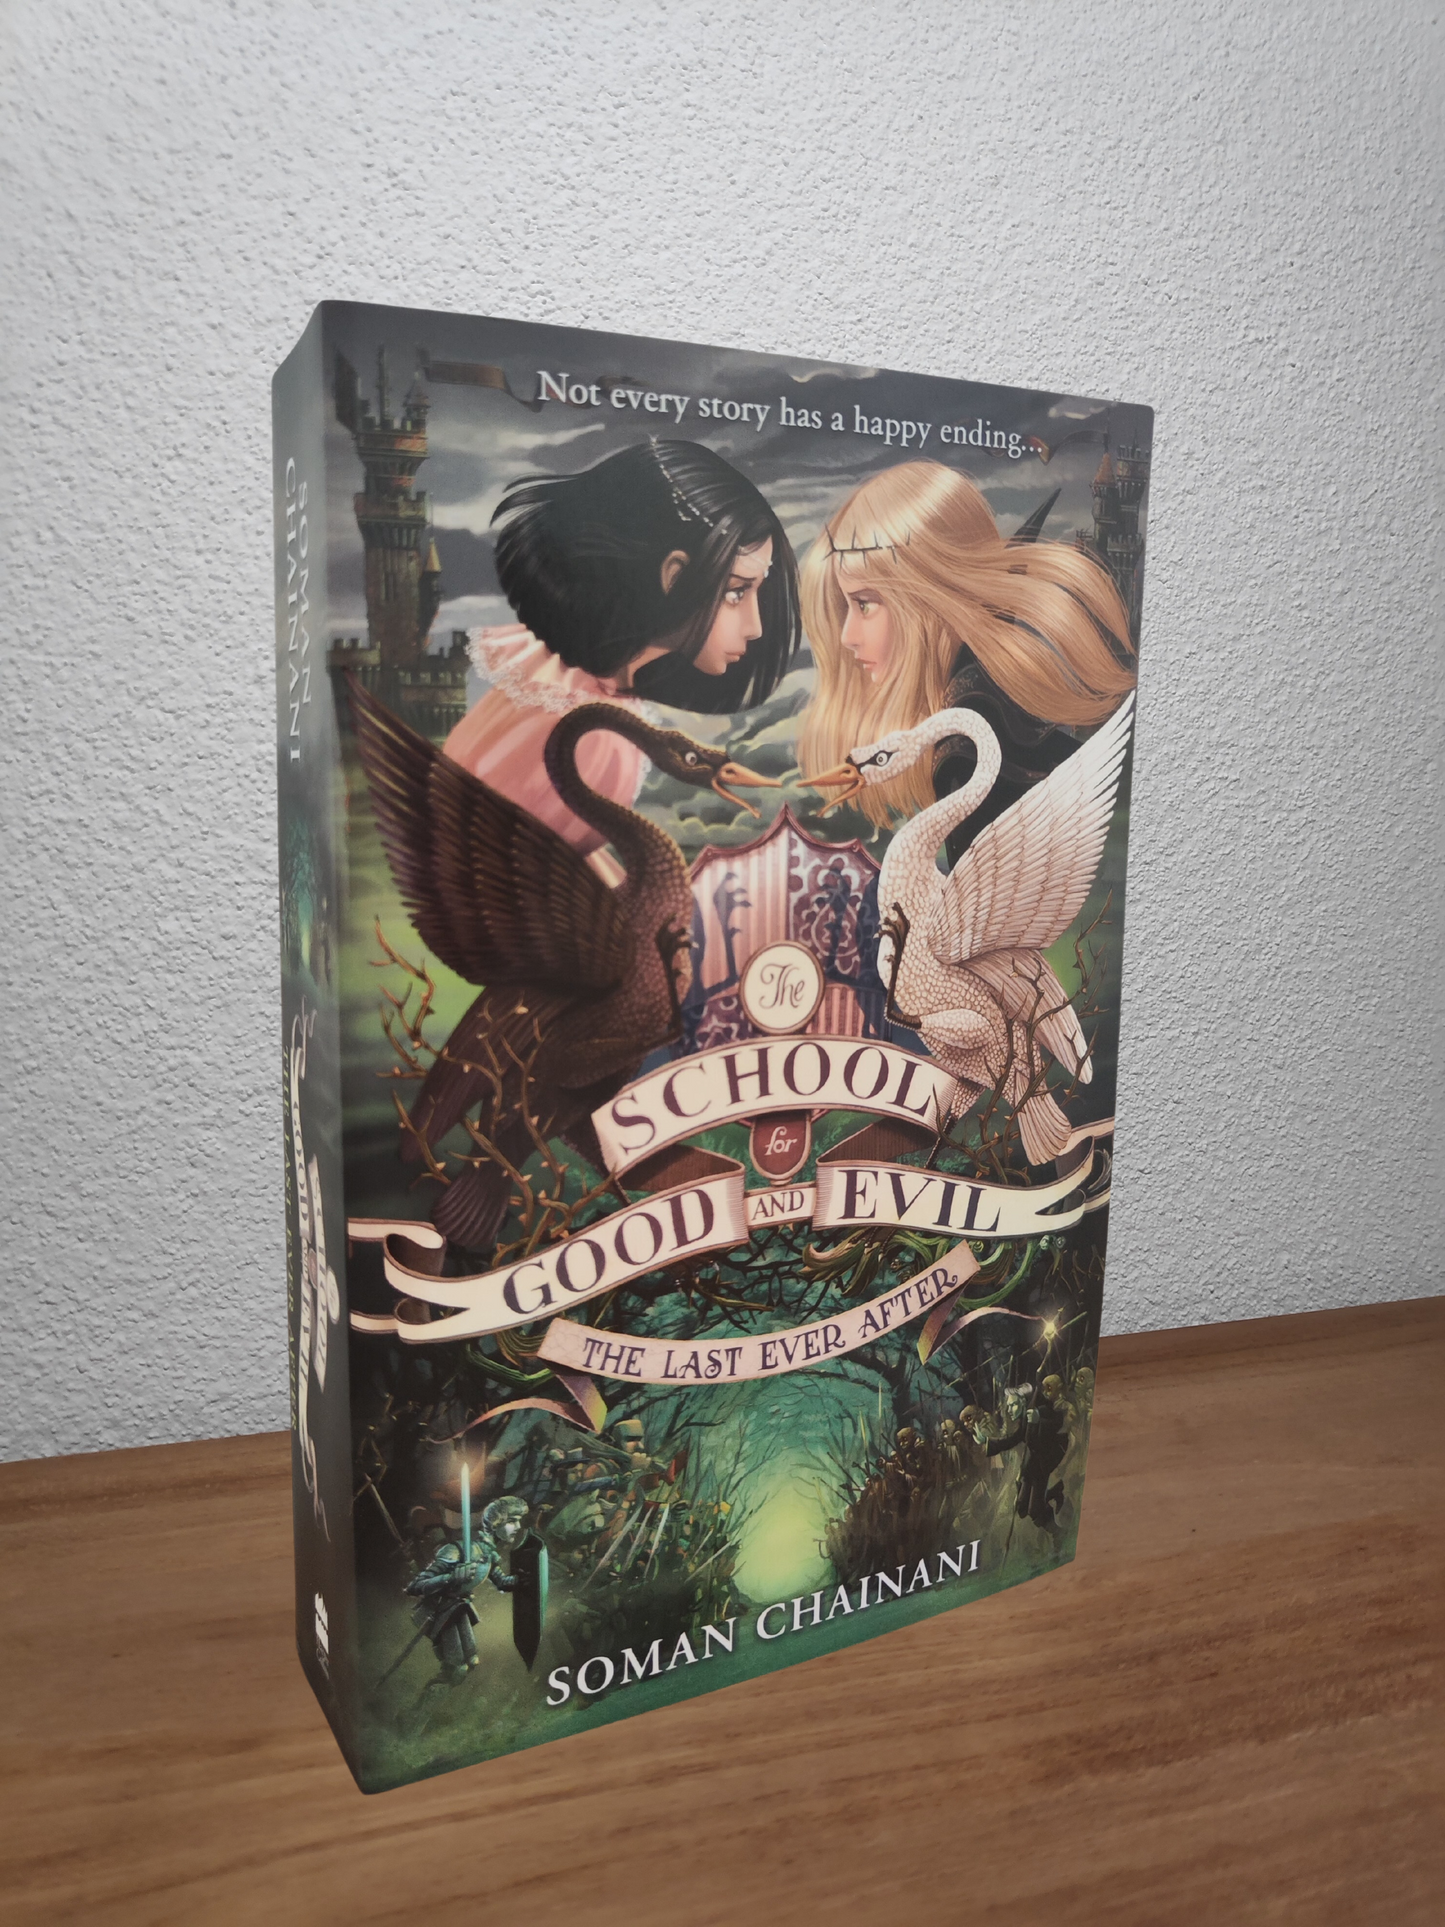 Soman Chainani - The School of Good and Evil: The Last Ever After #3